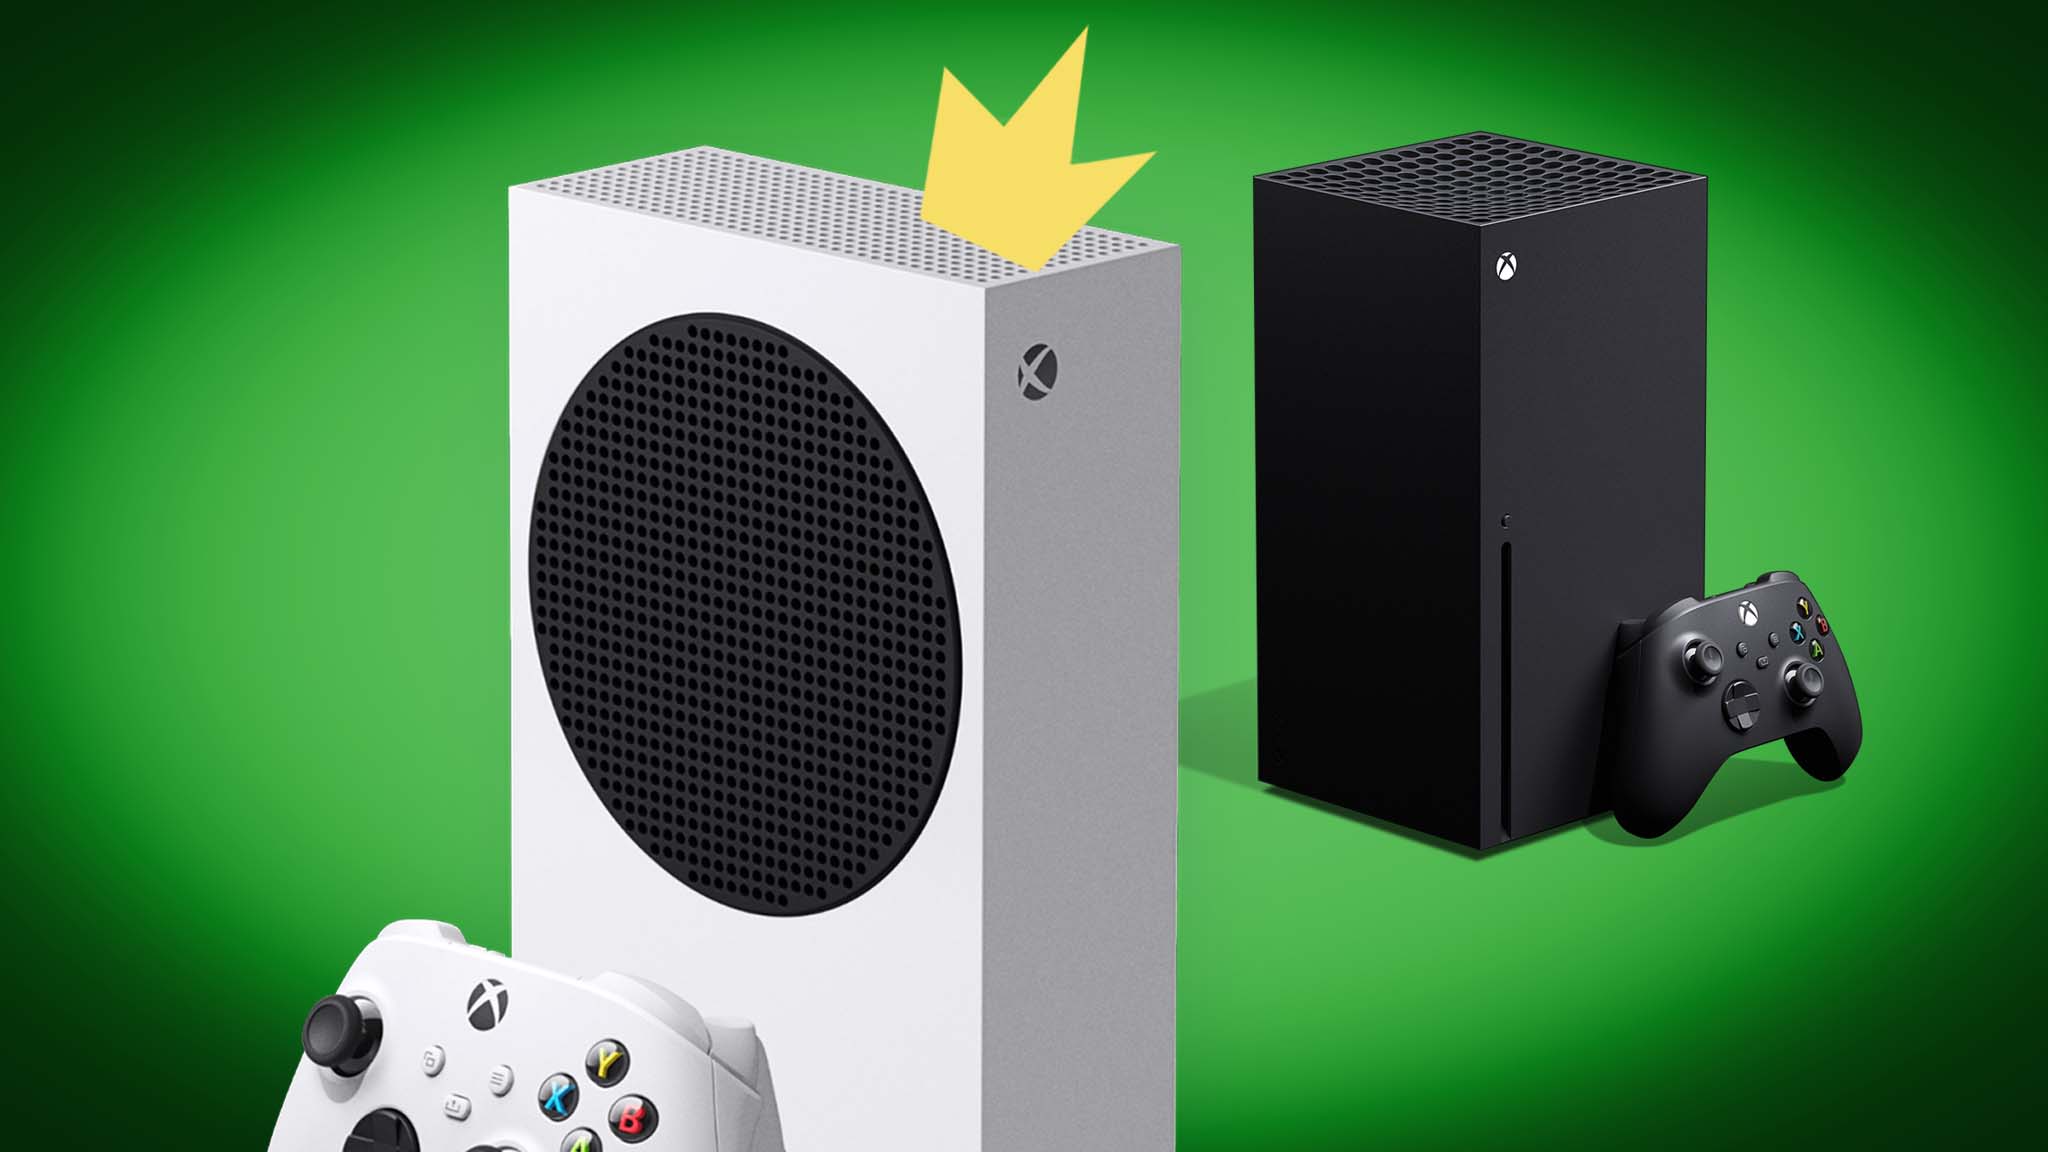 Walmart Has Xbox Series X Available Right Now for Immediate Purchase - IGN